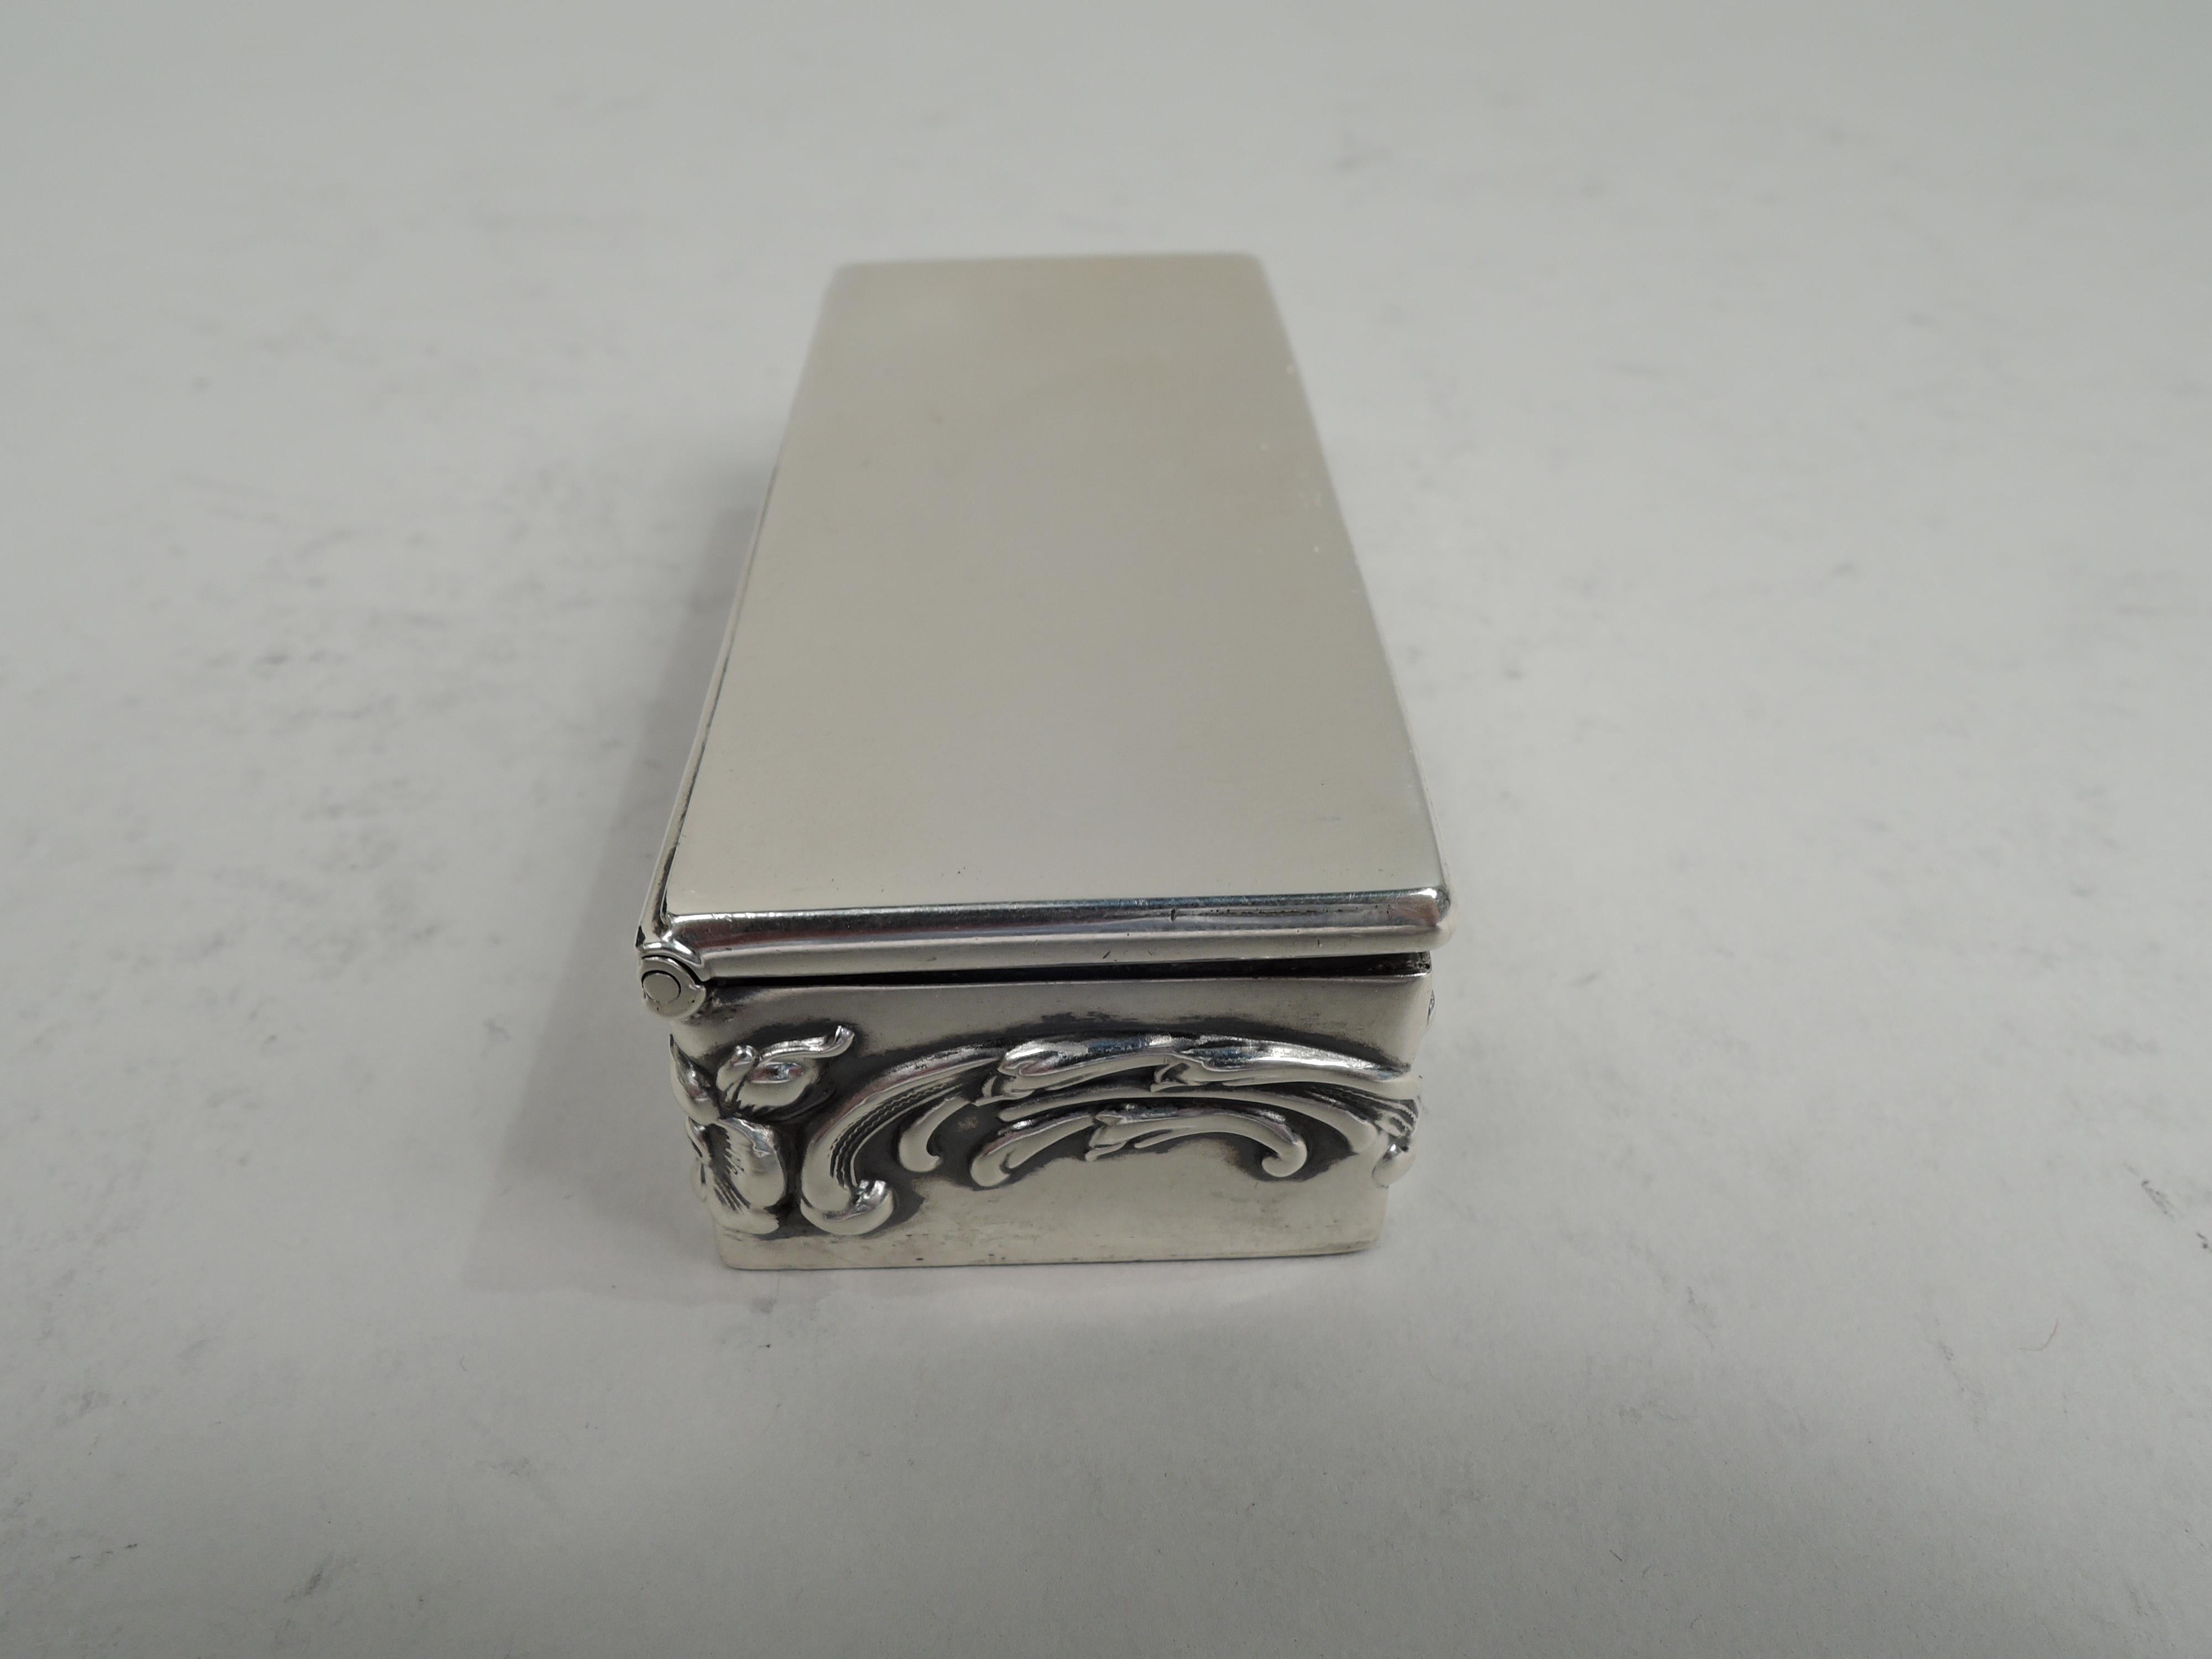 Edwardian Art Nouveau sterling silver postage stamp box. Made by Lebkuecher in Newark, ca 1910. Rectangular with flat and hinged cover. Sides have embossed scrolls and flowers. Interior gilt, partitioned, and curved for 3 denominations. Fully marked